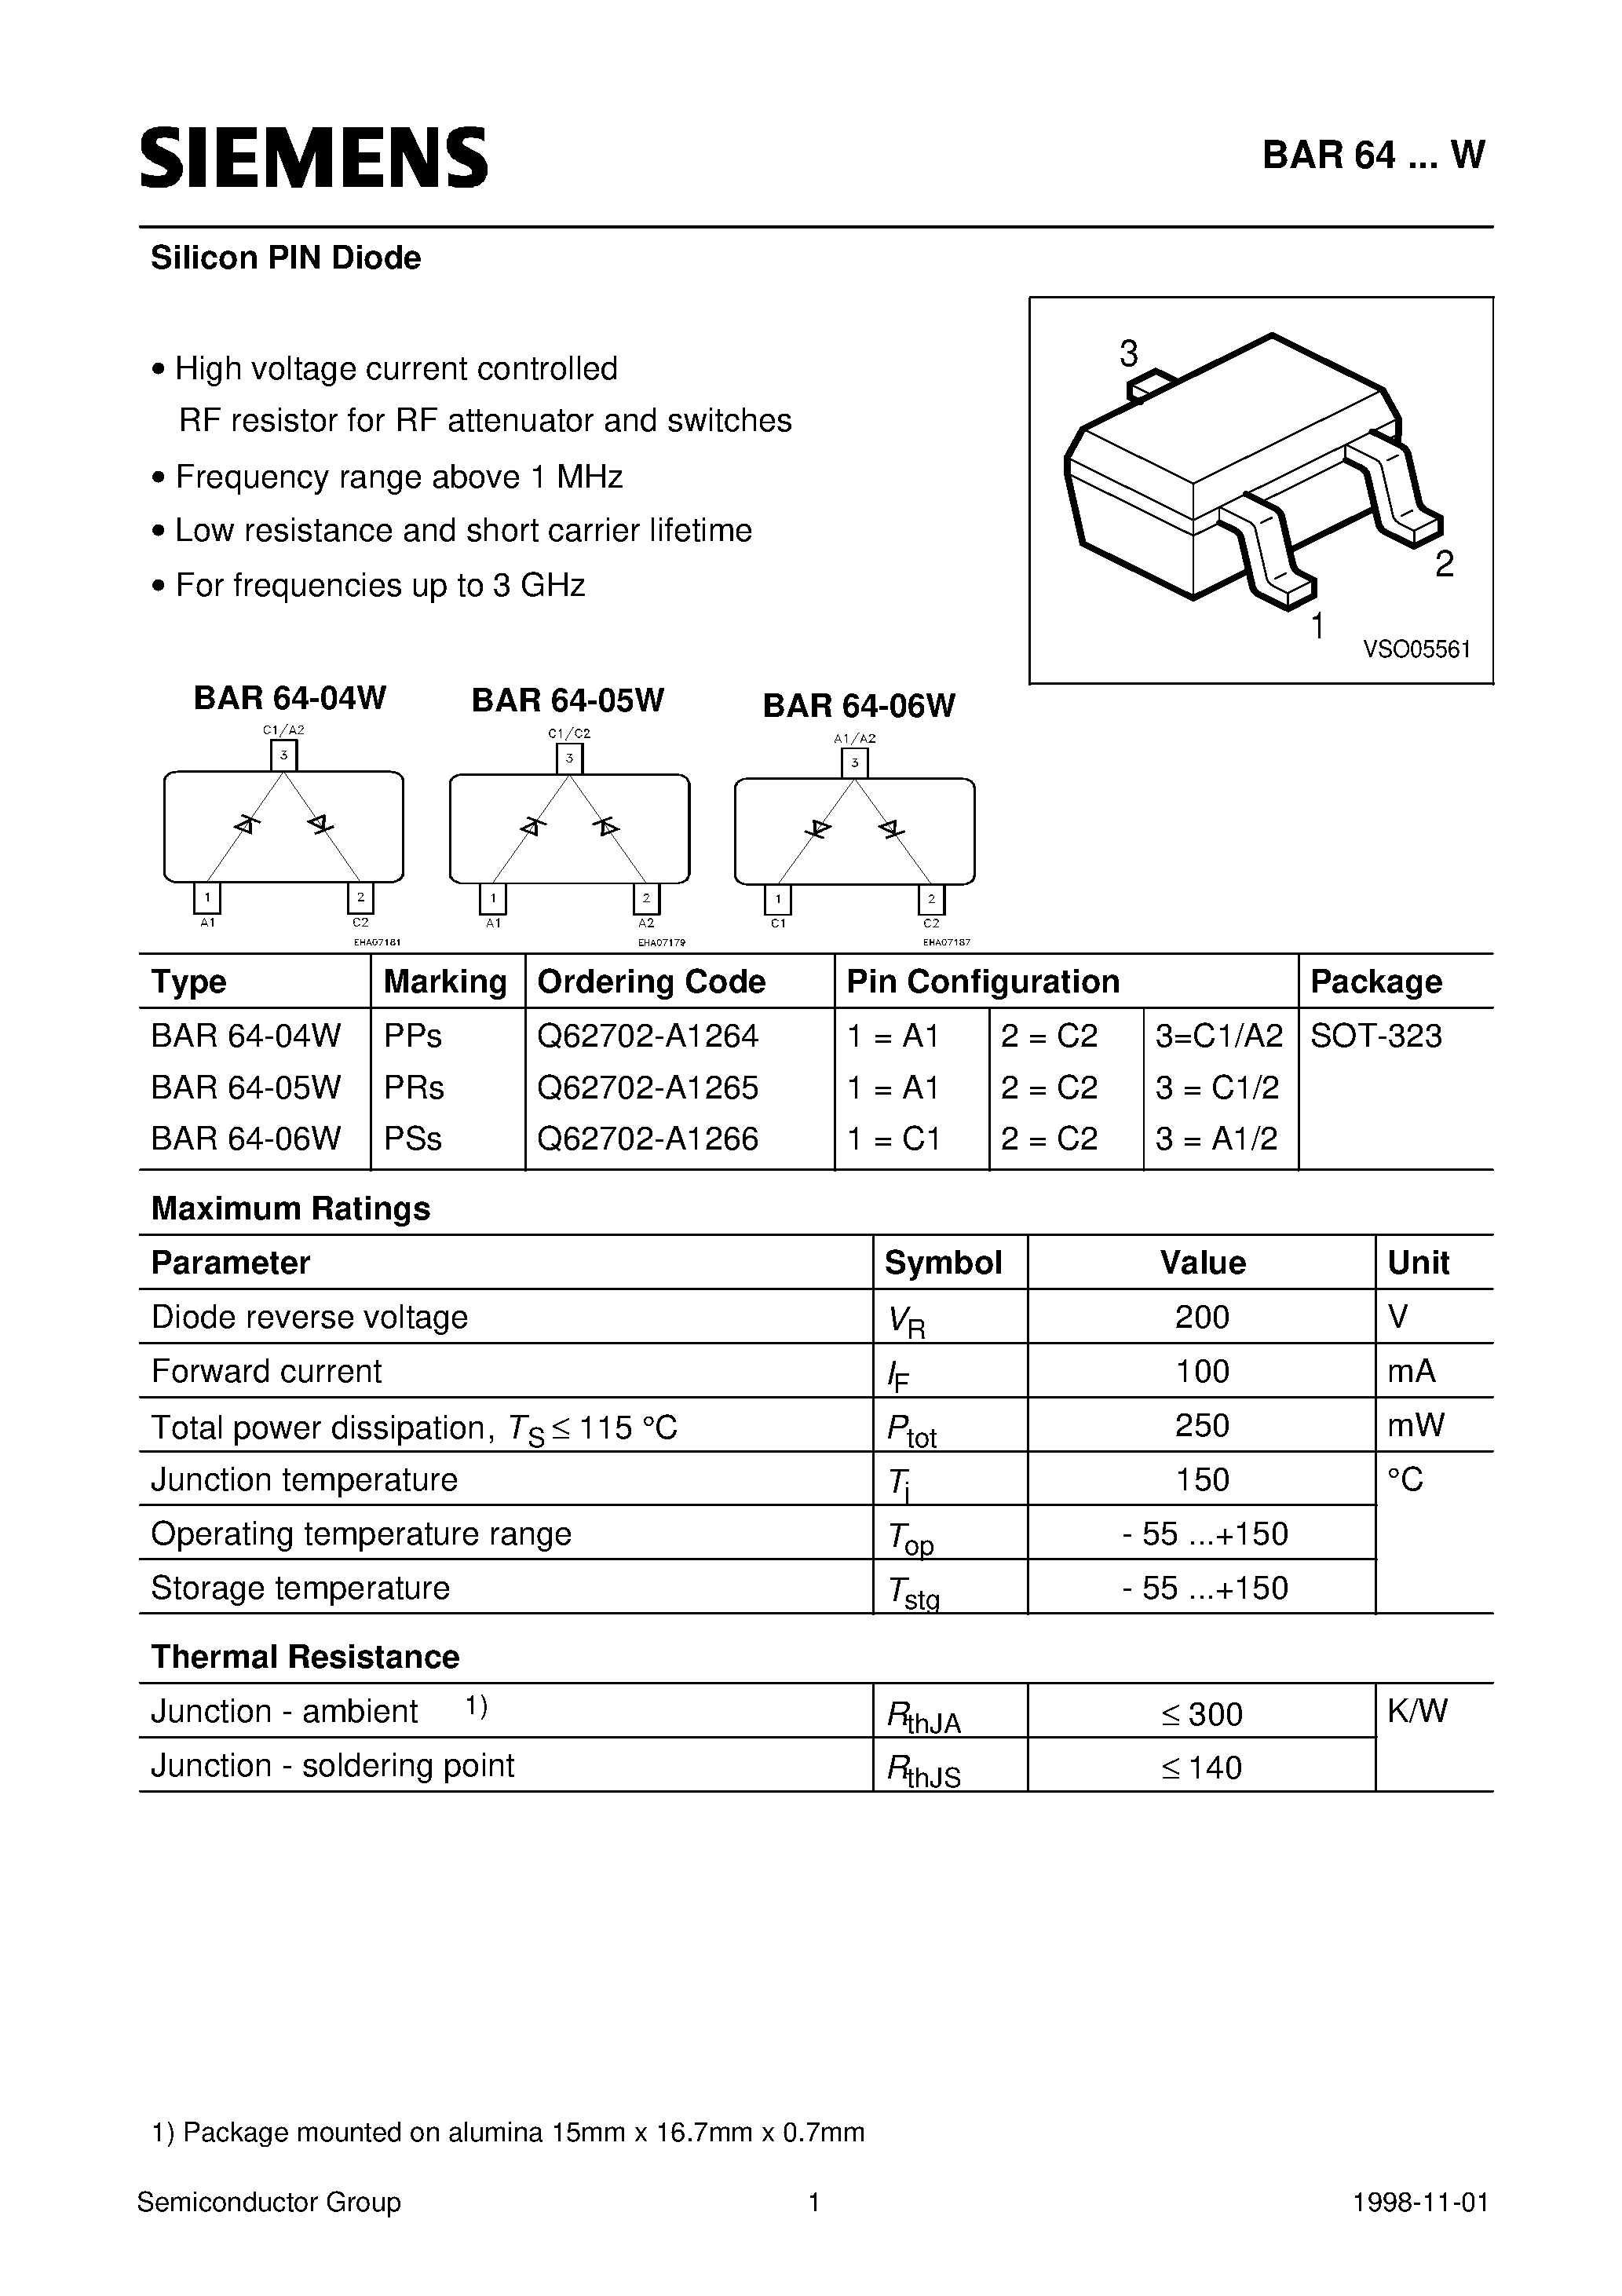 Datasheet BAR64-W - Silicon PIN Diode (High voltage current controlled RF resistor for RF attenuator and switches Frequency range above 1 MHz) page 1